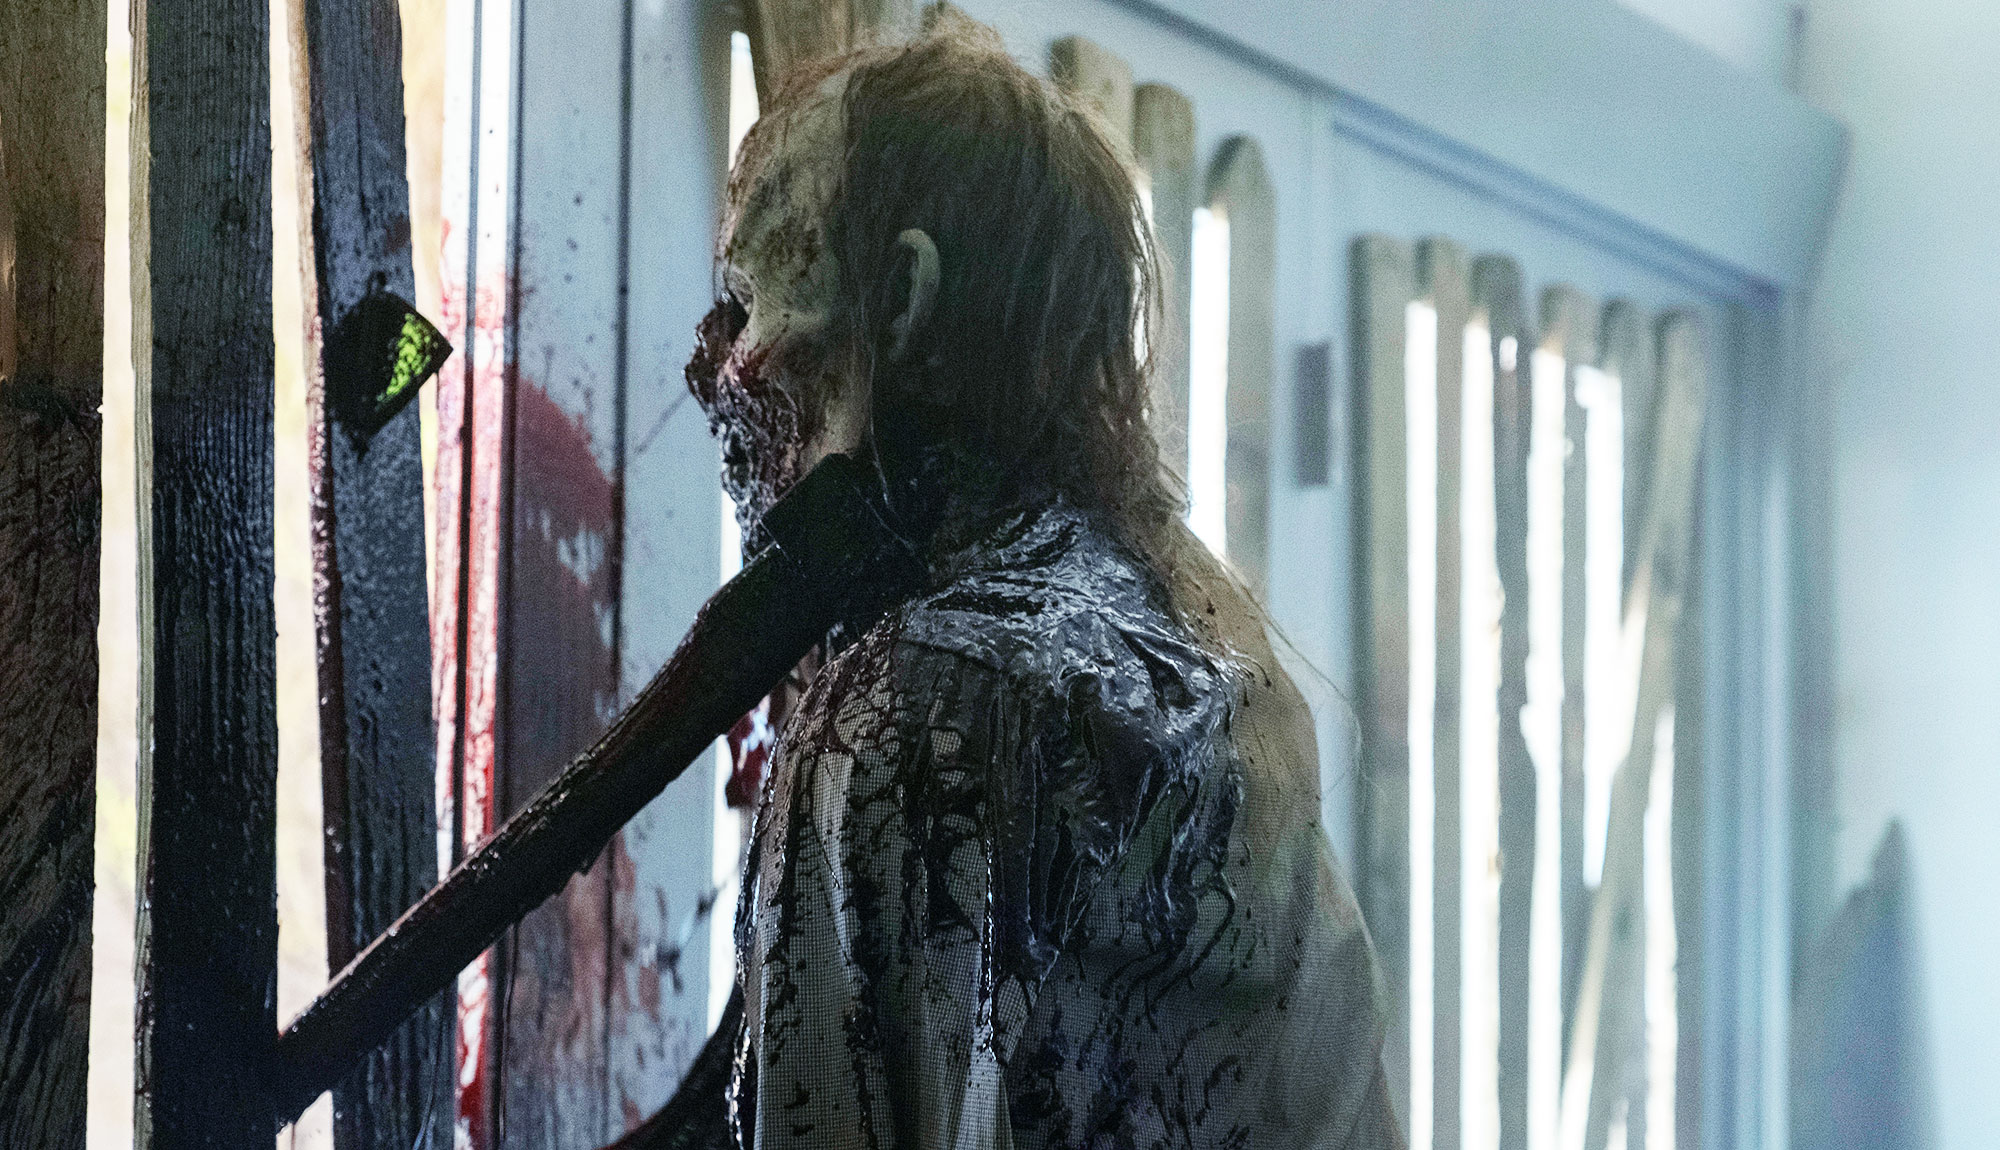 The Opening Minutes of Fear the Walking Dead Episode 510